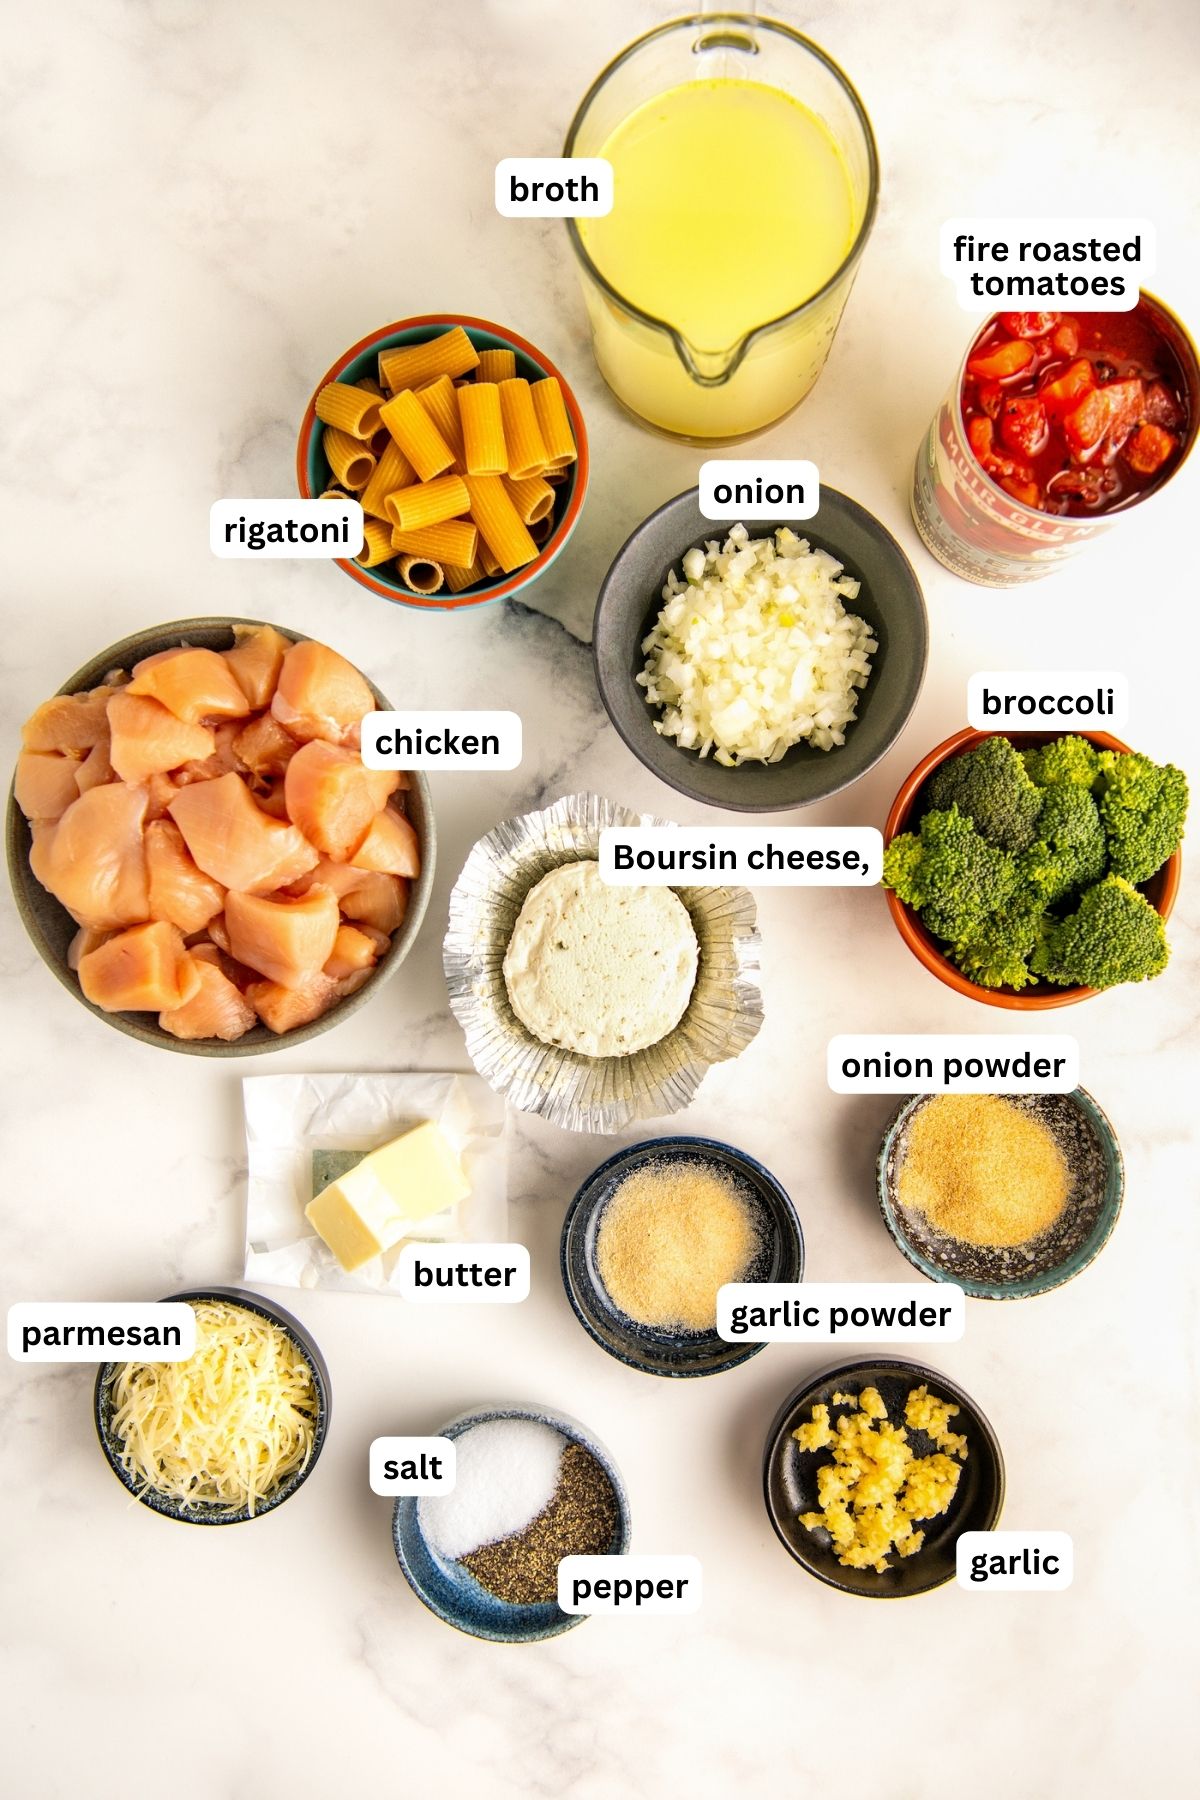 Ingredients in bowls for Boursin cheese pasta recipe. From top to bottom: chicken broth, fire roasted tomatoes, rigatoni, onion, chicken, boursin cheese, broccoli florets, butter, garlic powder, onion powder, parmesan cheese, salt, pepper and fresh garlic.